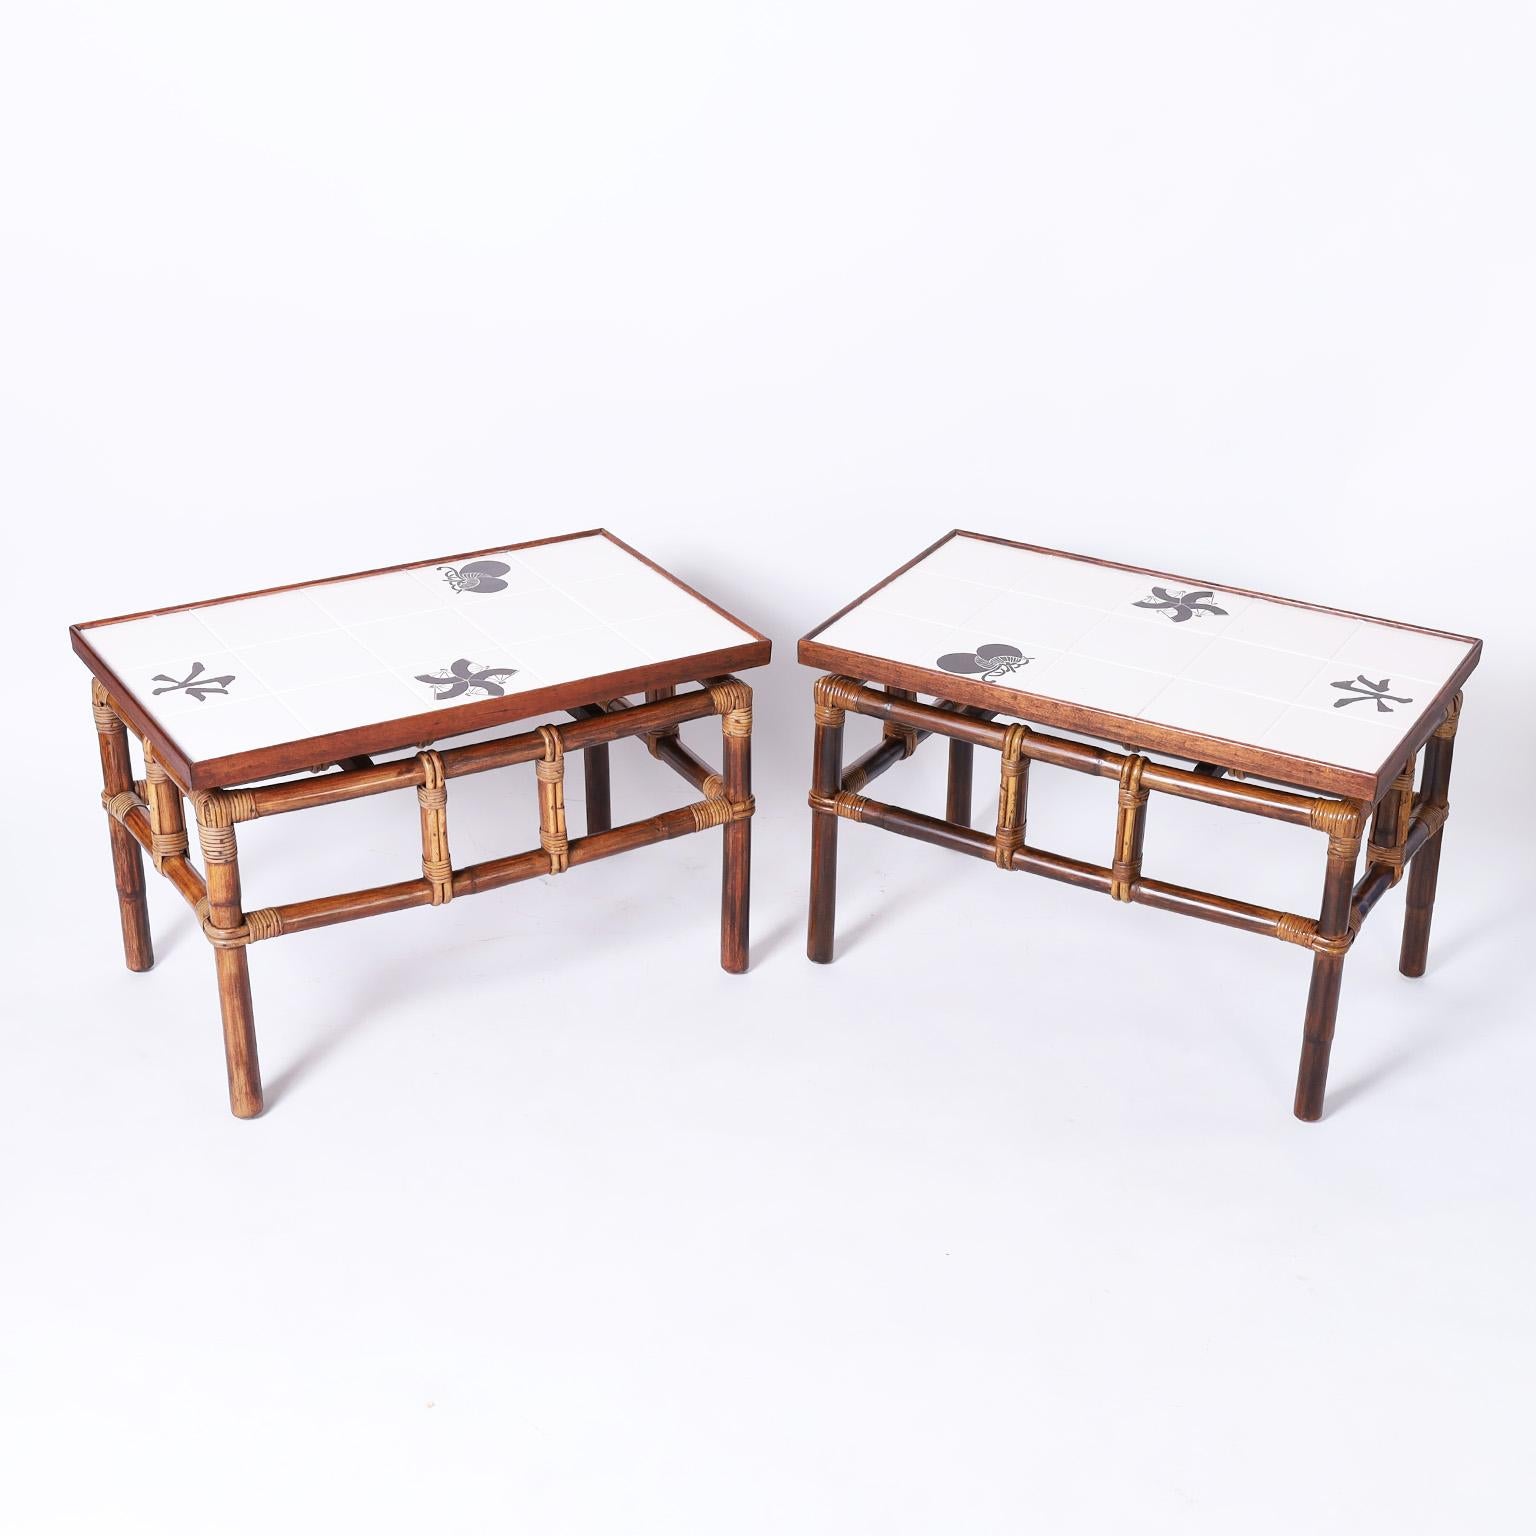 Japonisme Pair of Bamboo Tile Top Tables or Stands For Sale